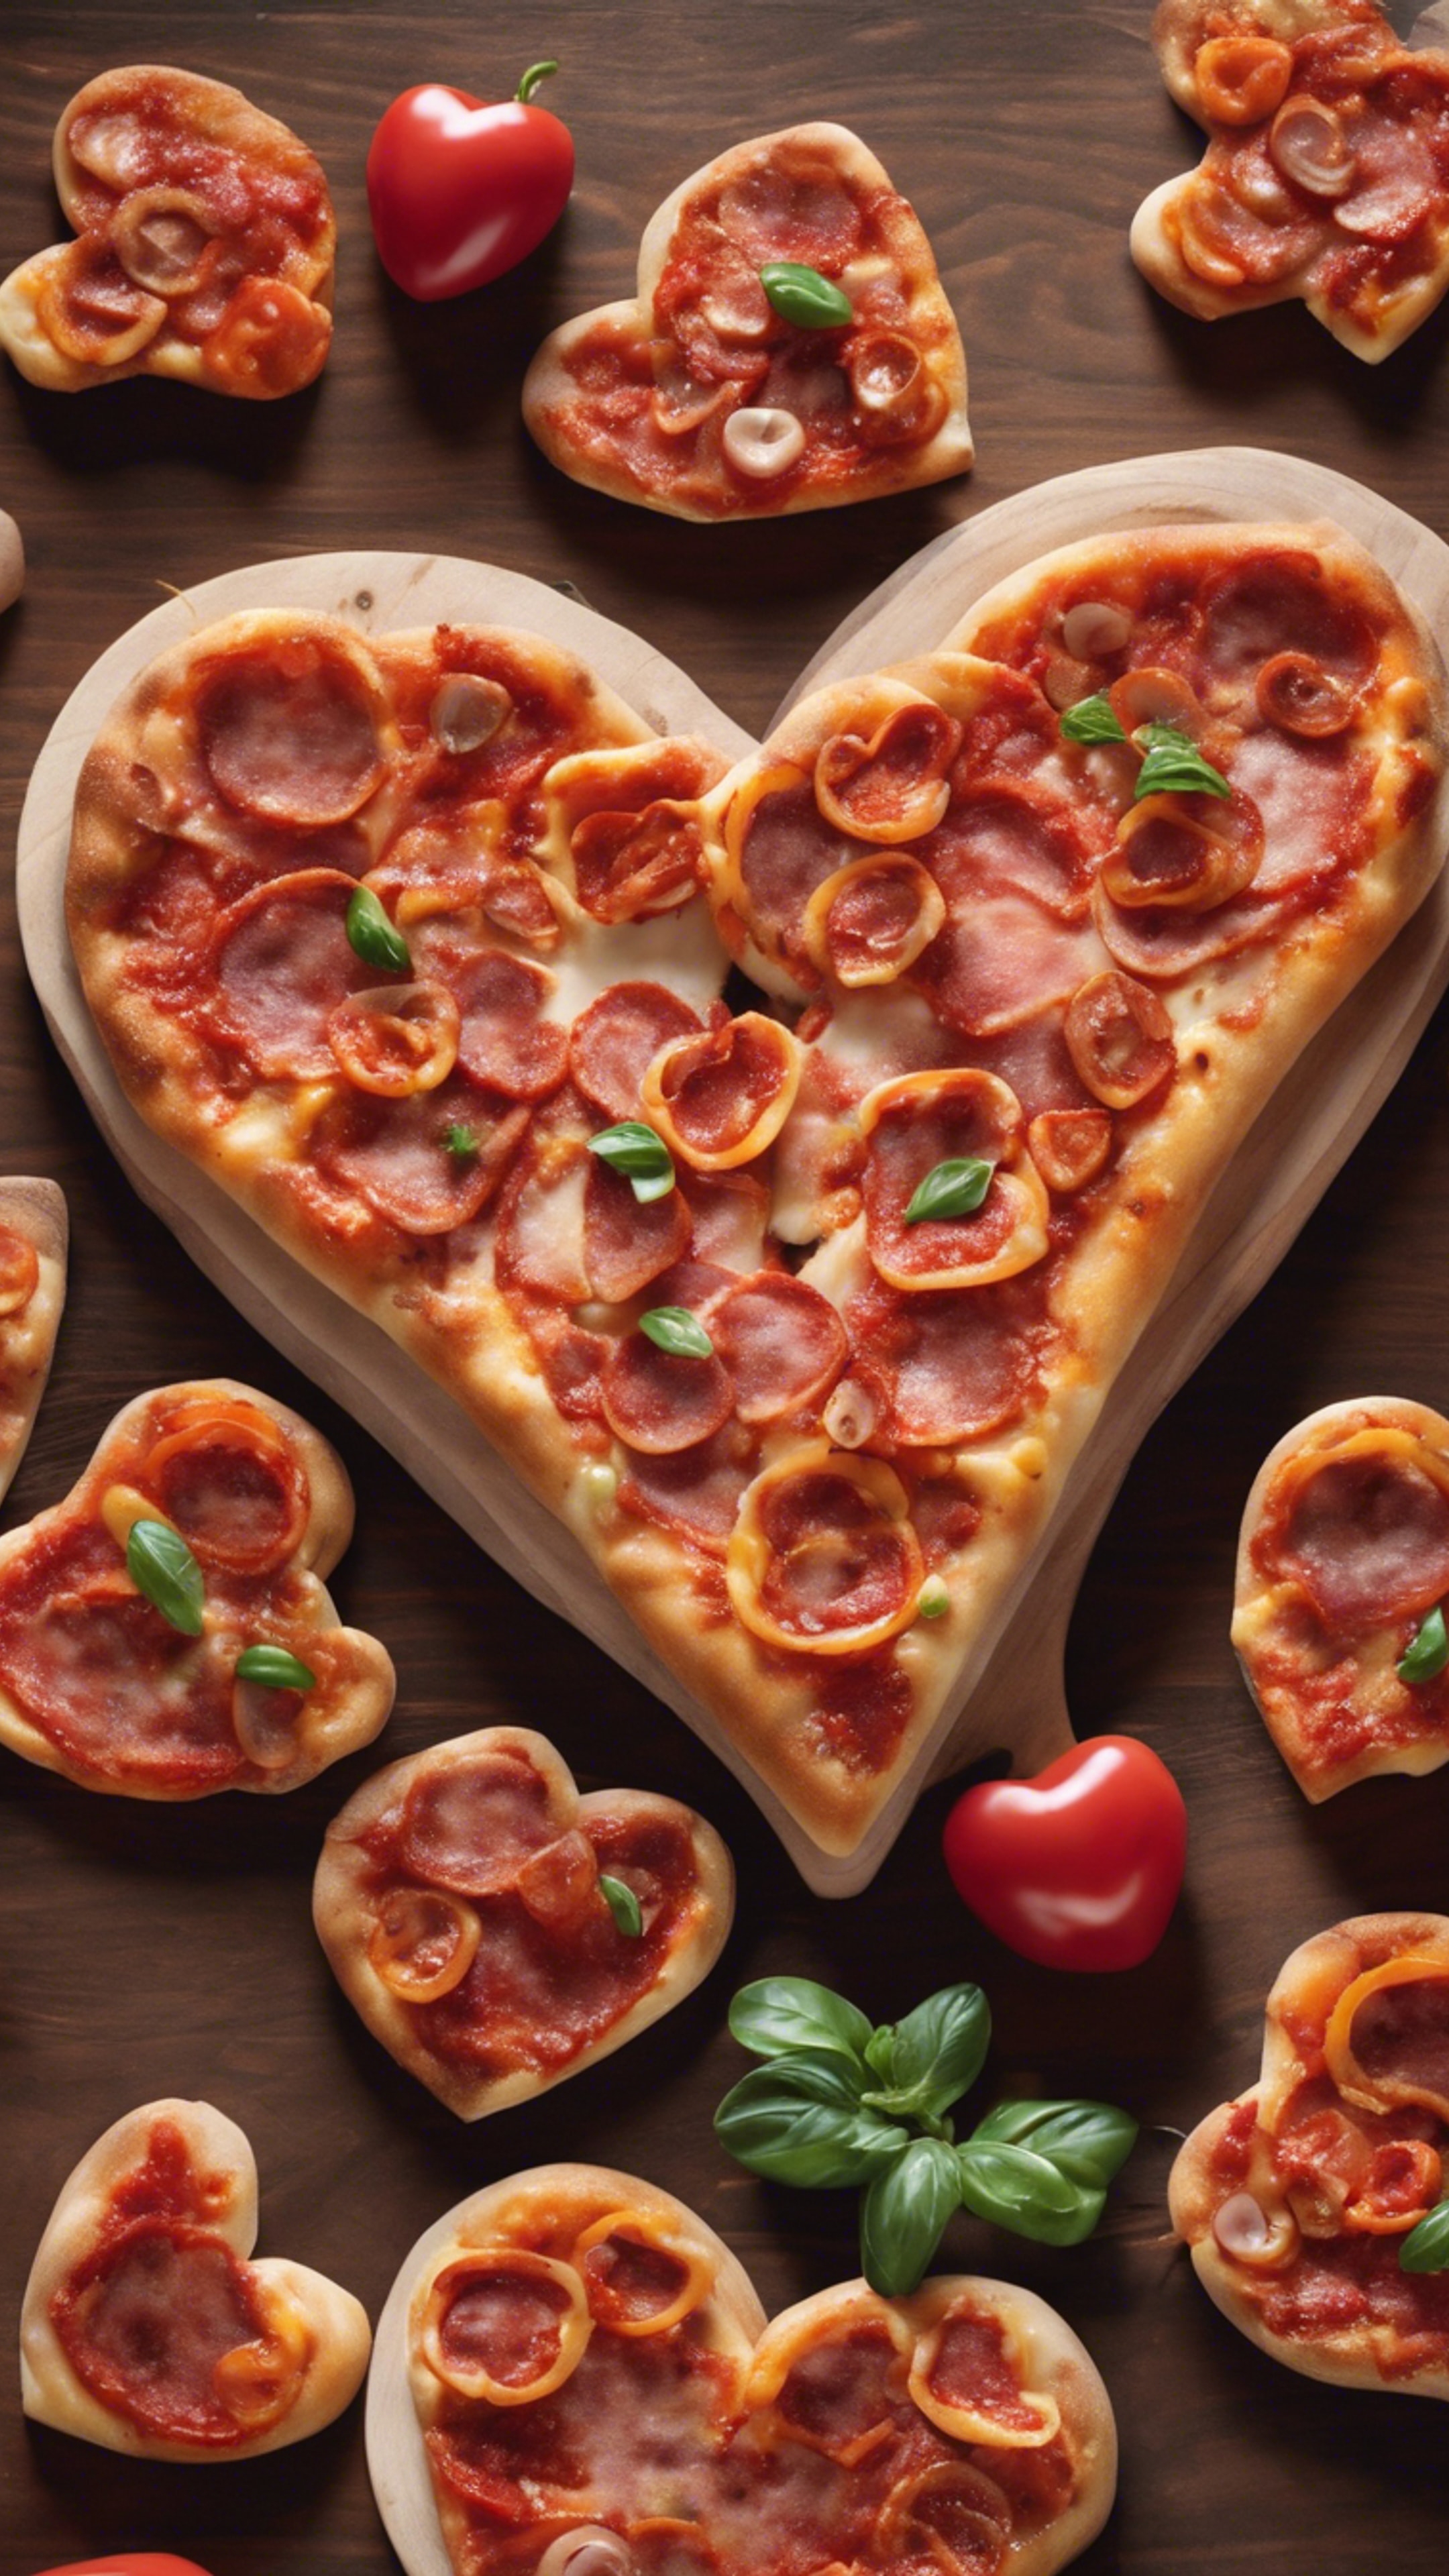 A heart-shaped pizza topped with pepperonis arranged in a smaller heart shape, the perfect cuisine for a romantic date. duvar kağıdı[15df62b77c2f46a18143]